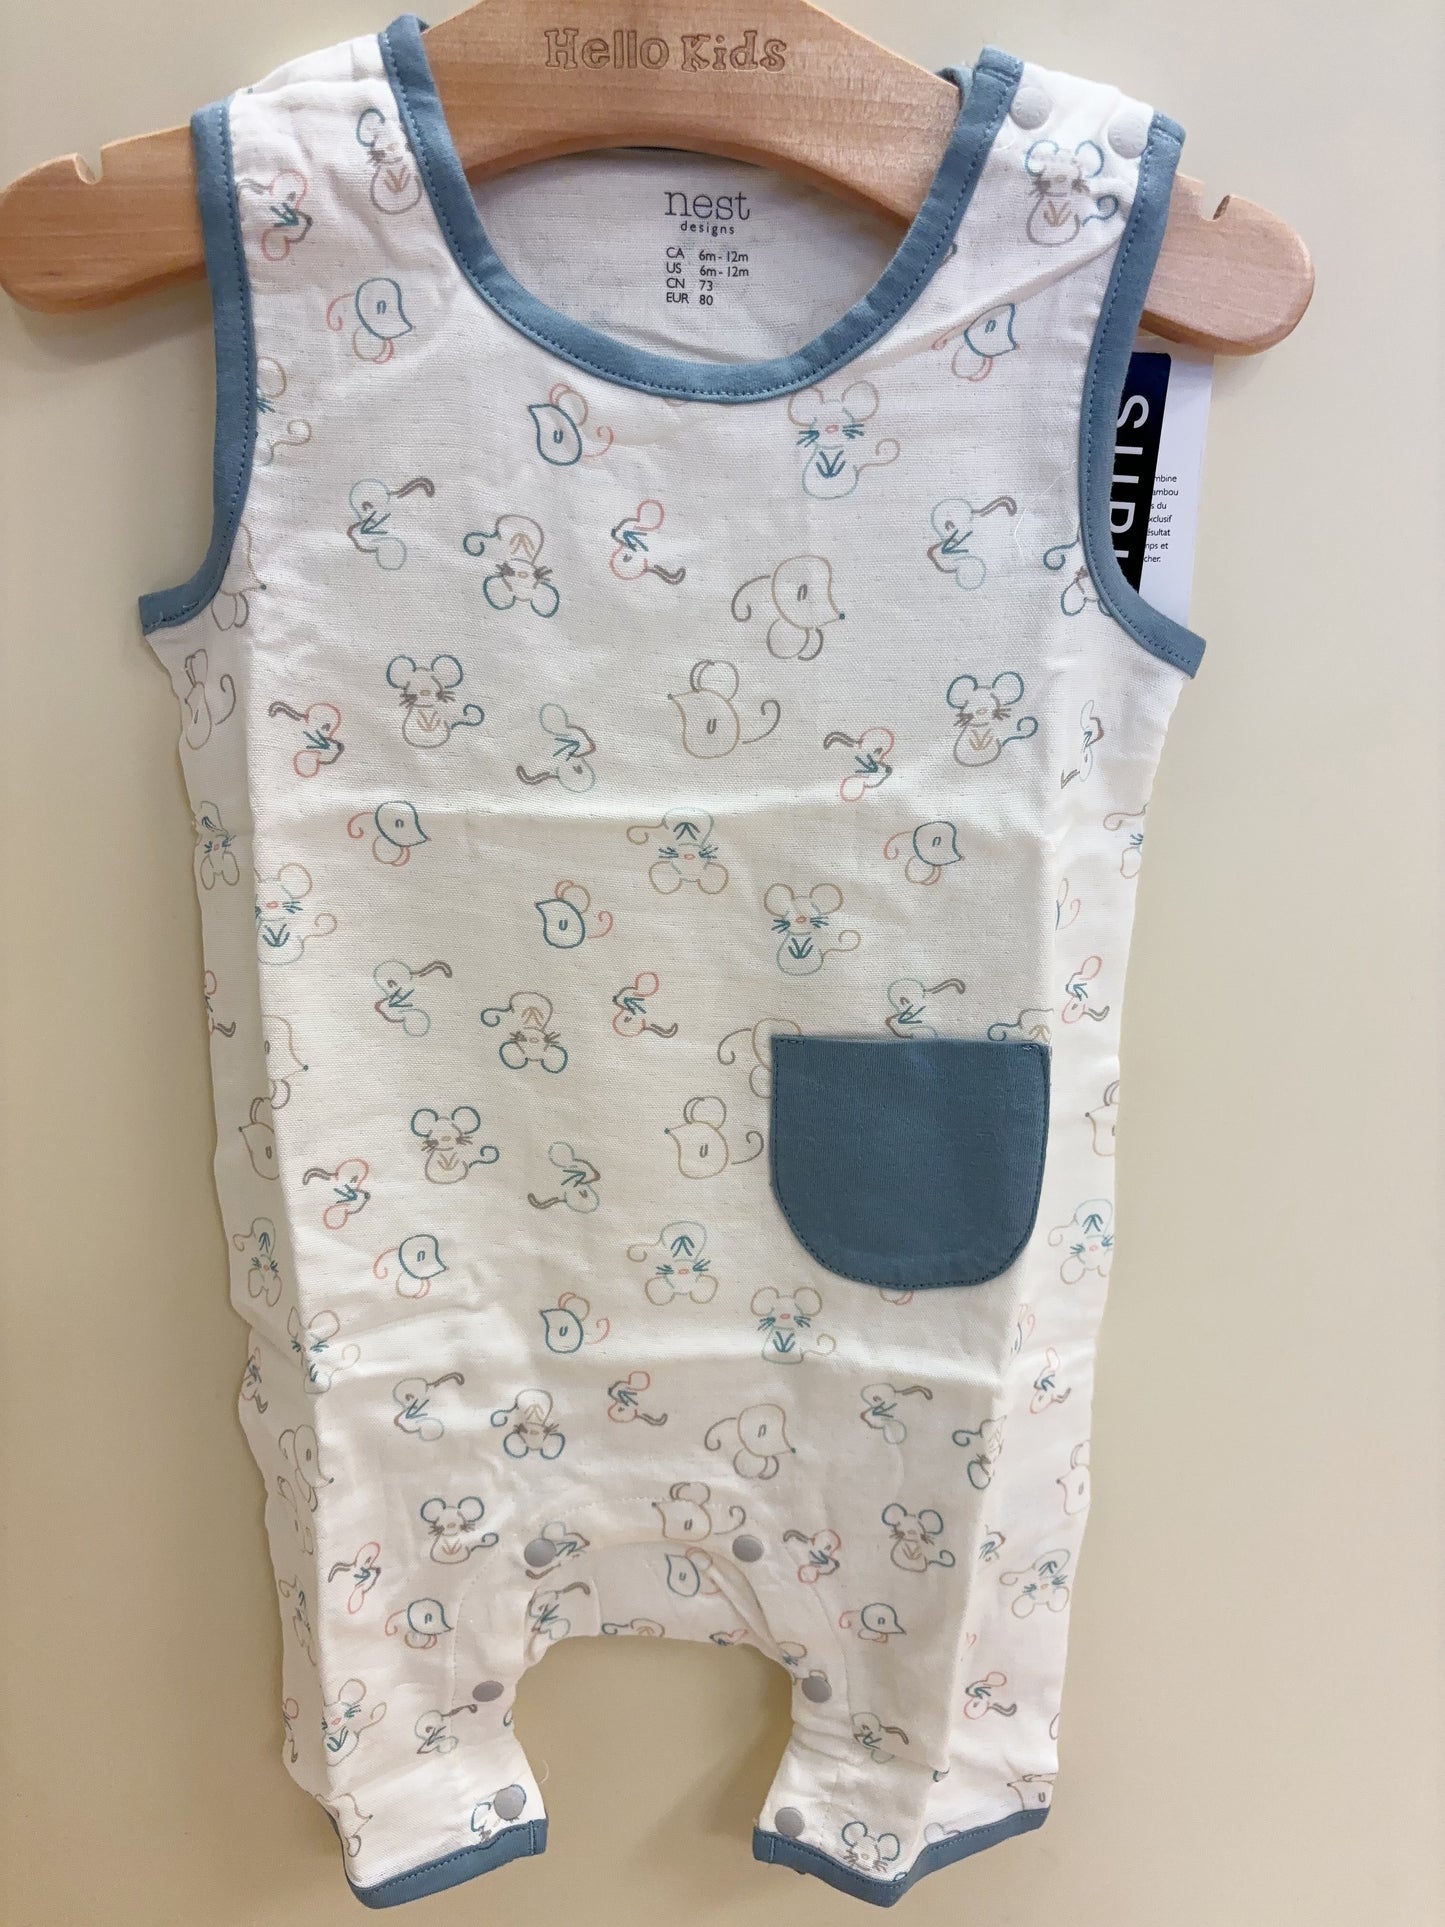 Nest Designs Bamboo Sleeveless Romper Mouse Tales